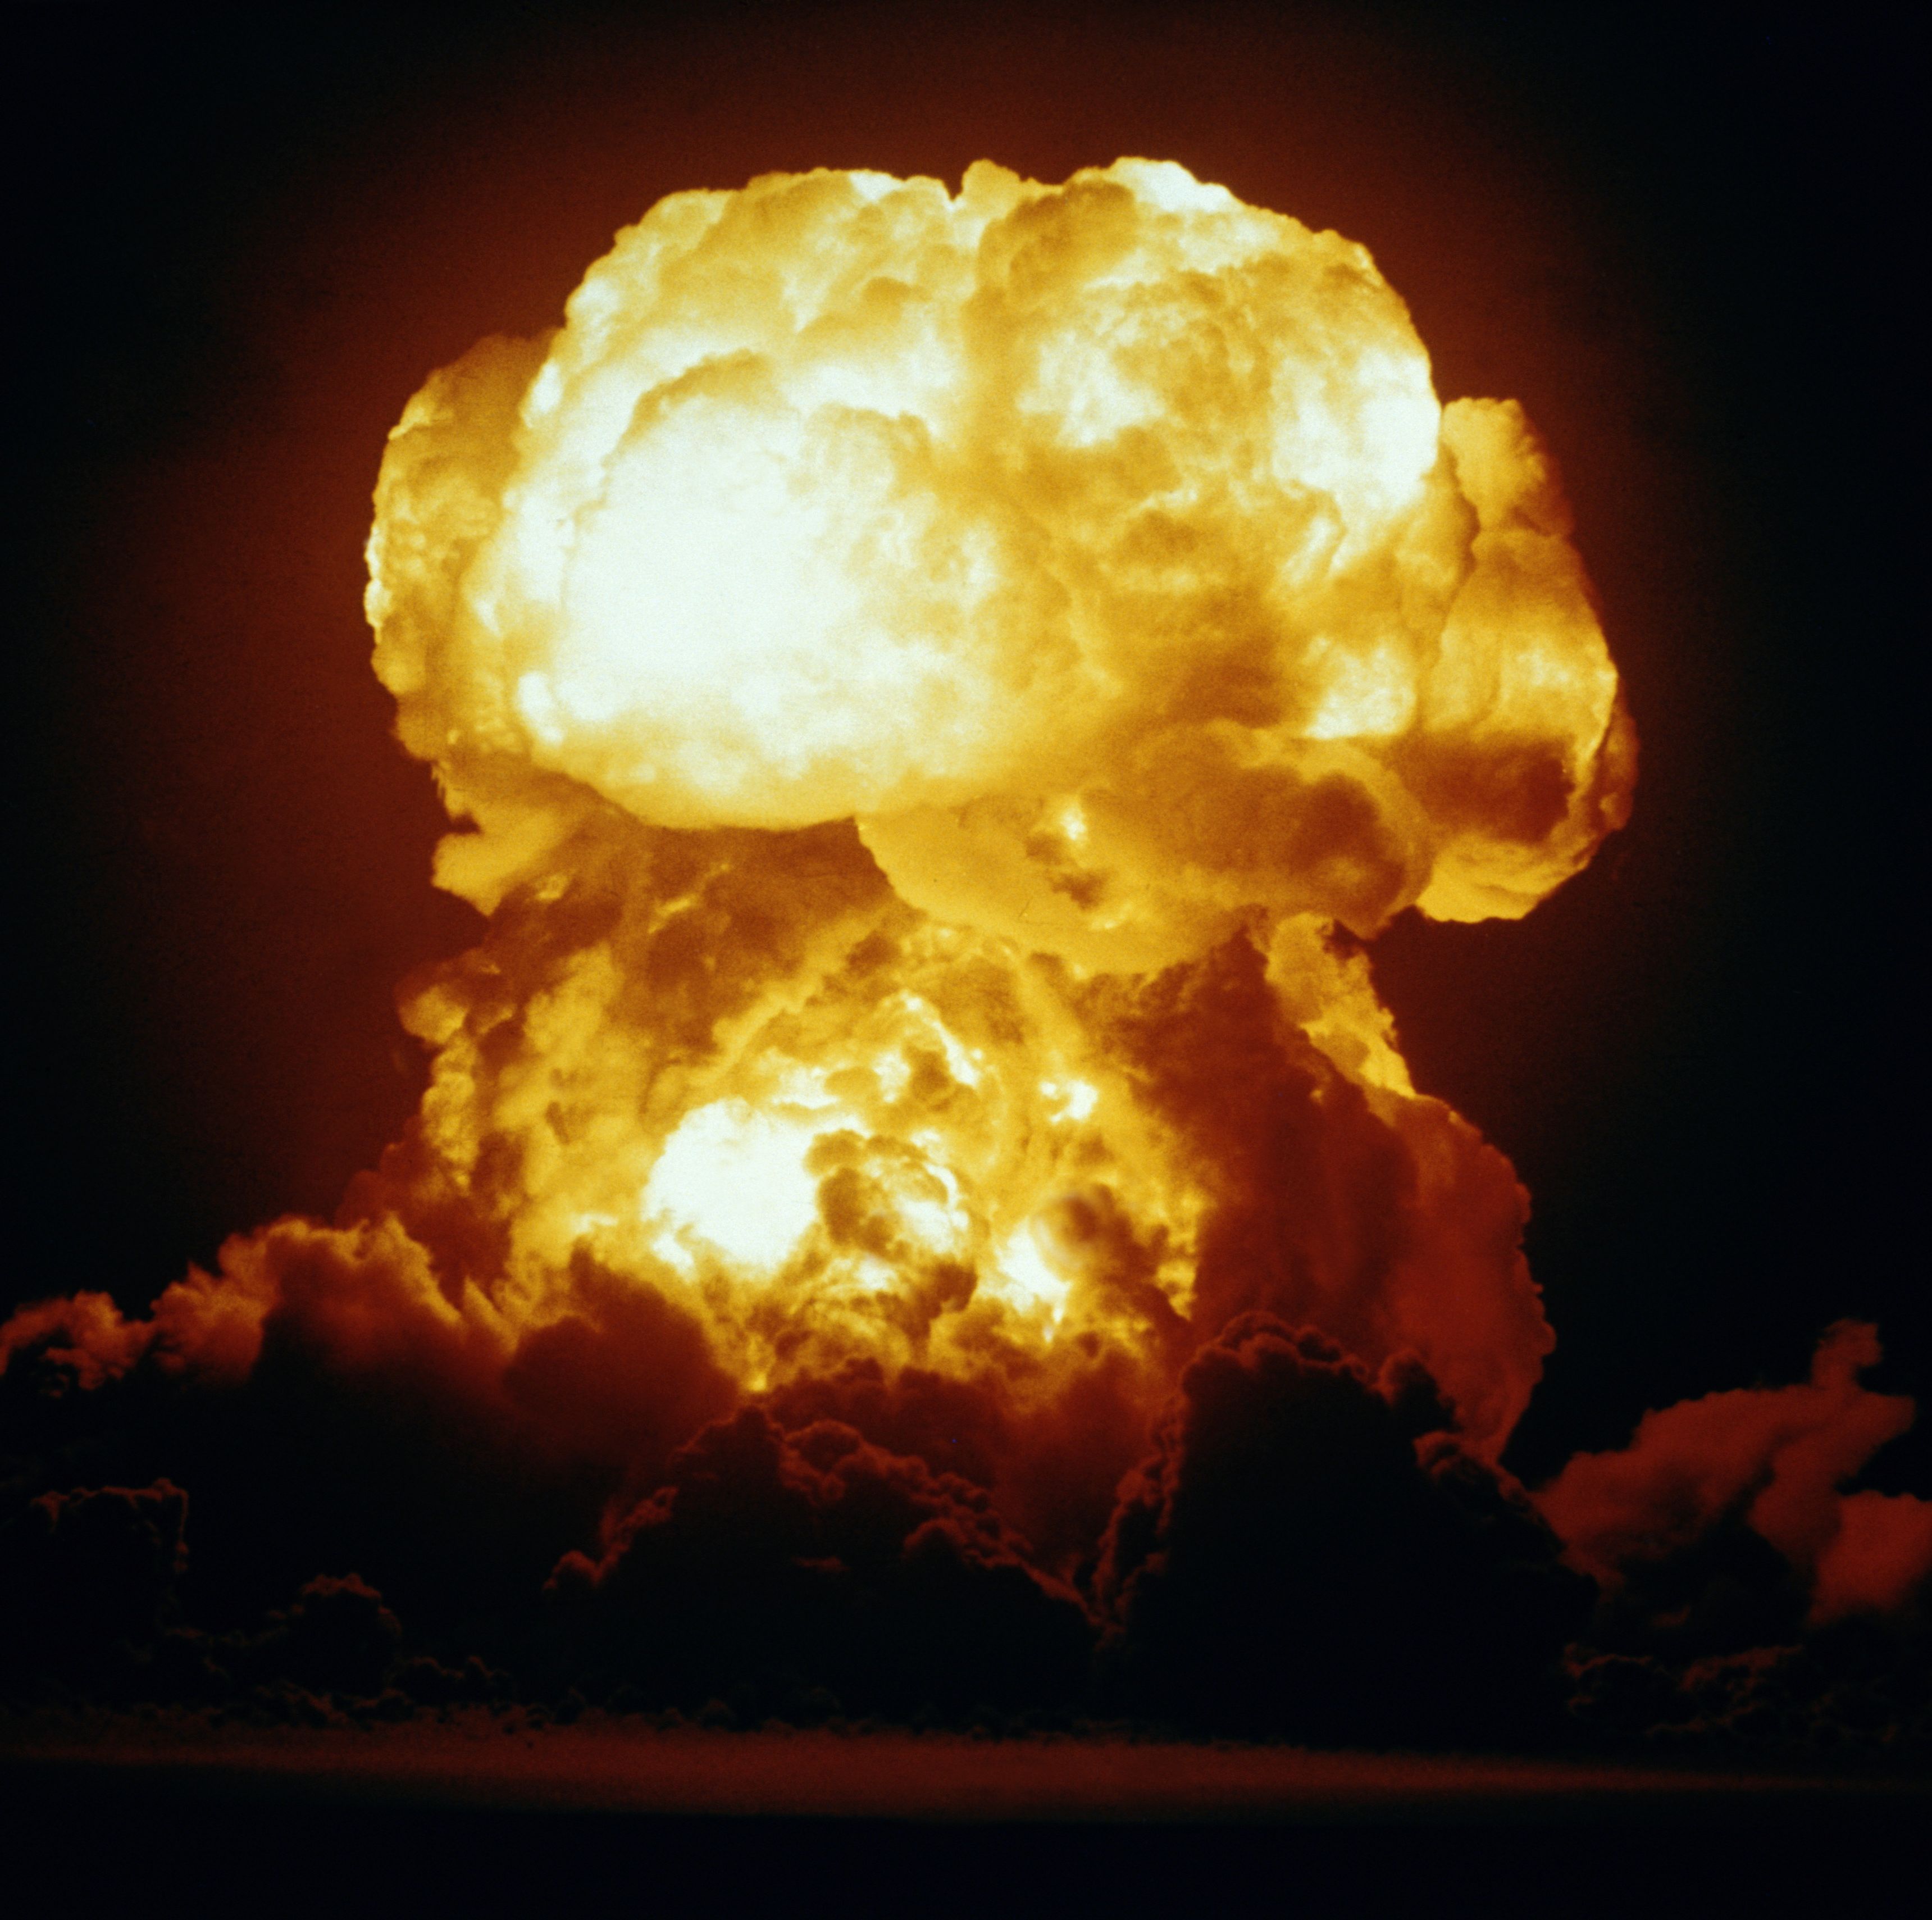 The Atomic Bombs of WWII Were Catastrophic, But Today's Nuclear Bombs Are Even More Terrifying